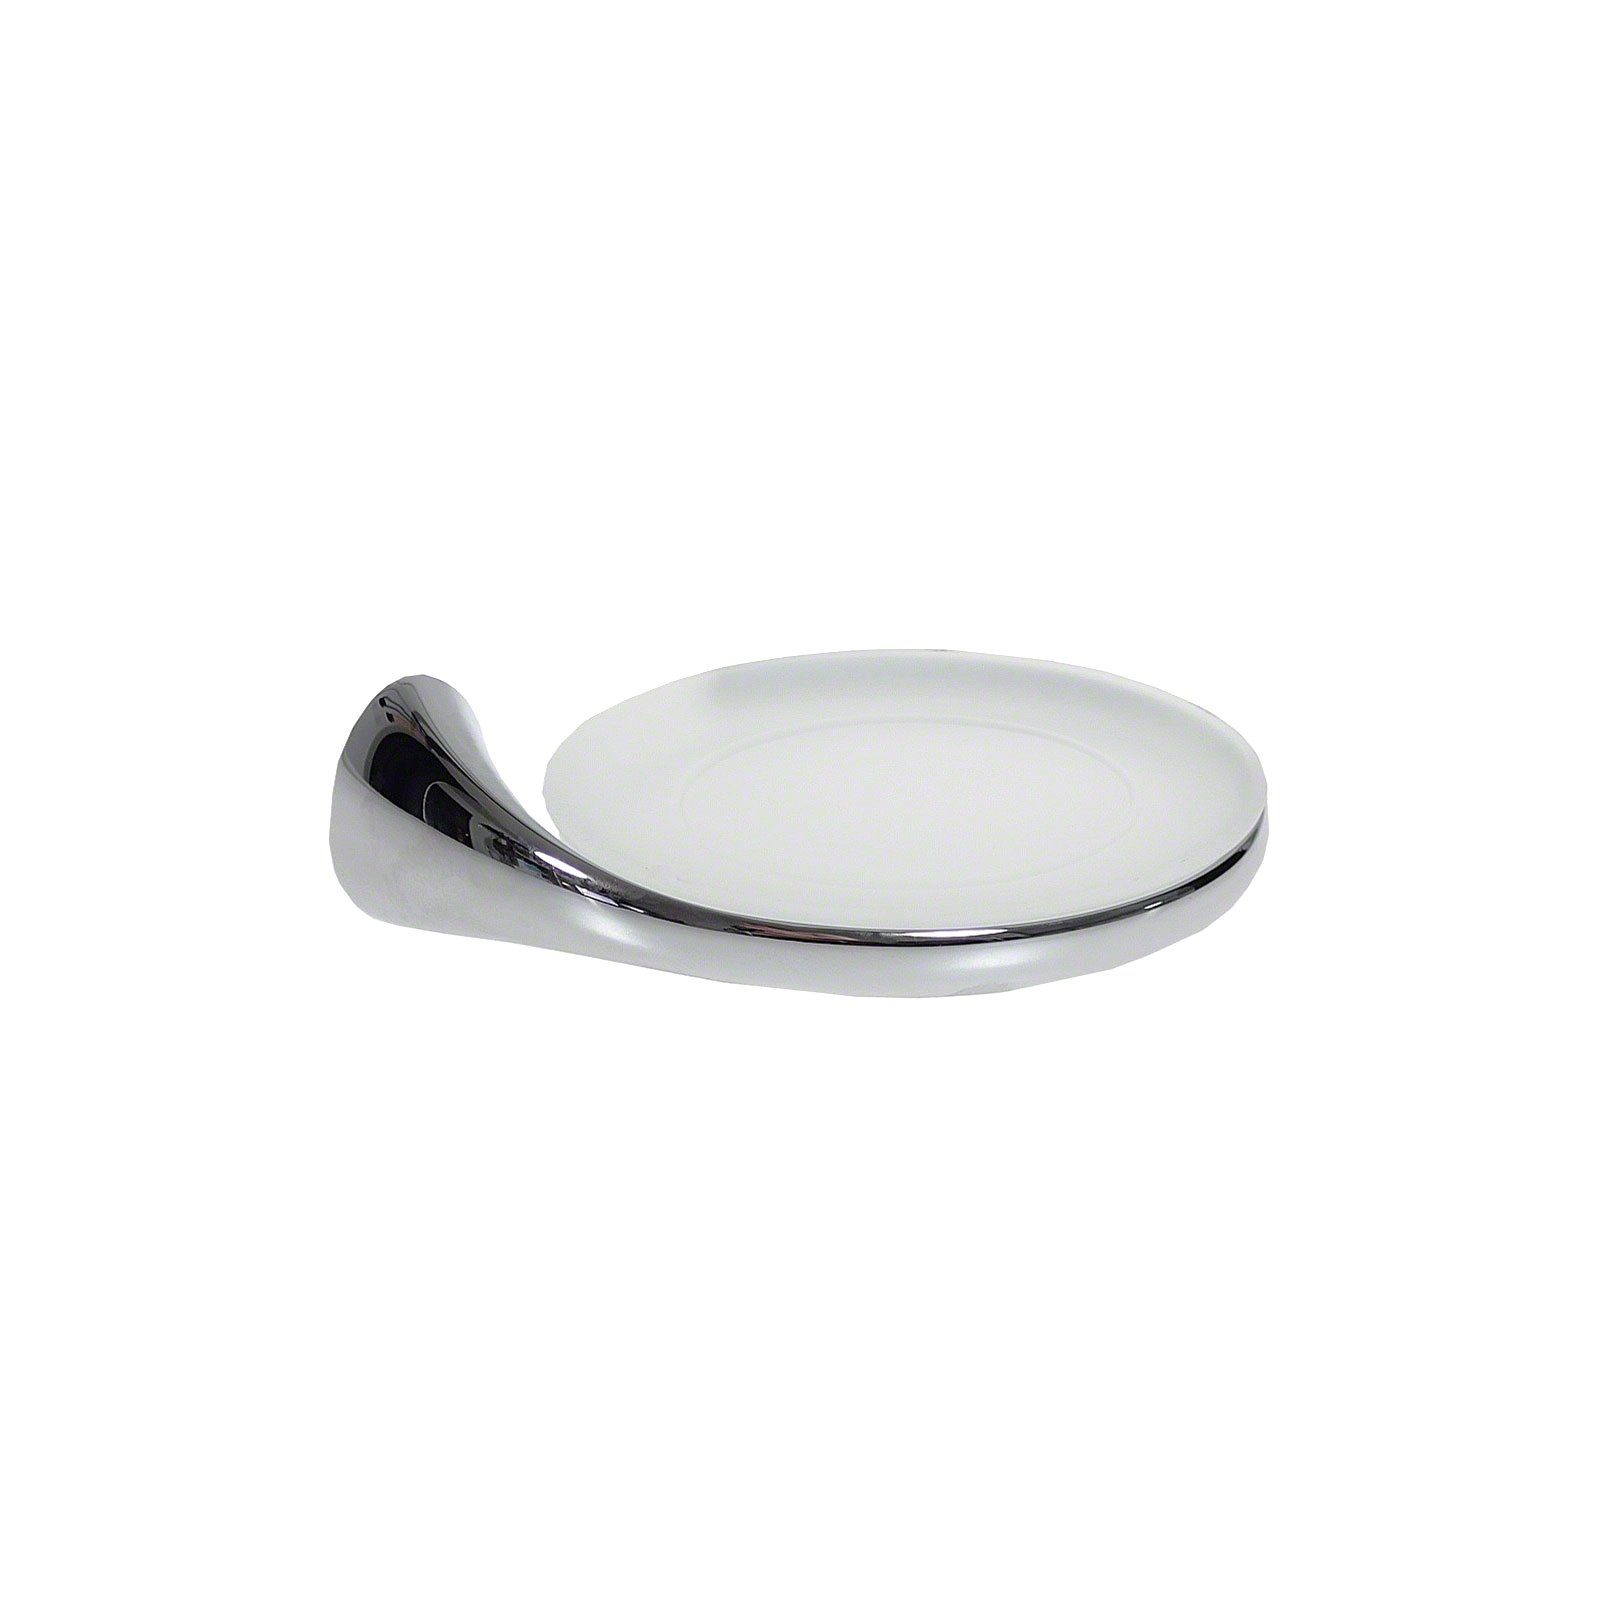 COLOMBO Badaccessoire-Set Dietsche Link B2401 Chrom by Colombo Seifenablage